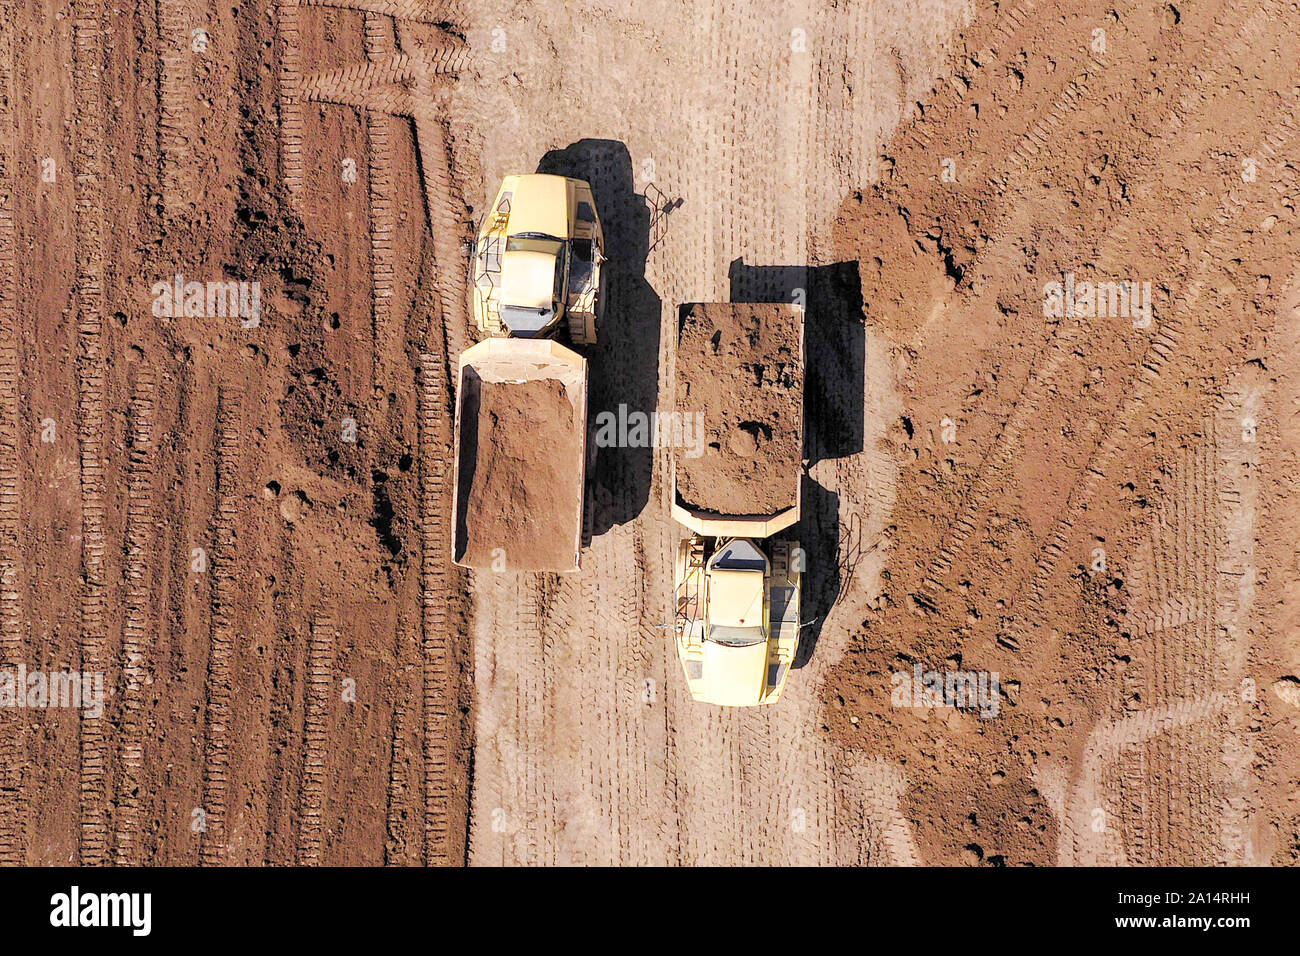 Articulated hauler Truck loaded with Soil at an industrial development site, Topdown aerial image. Stock Photo